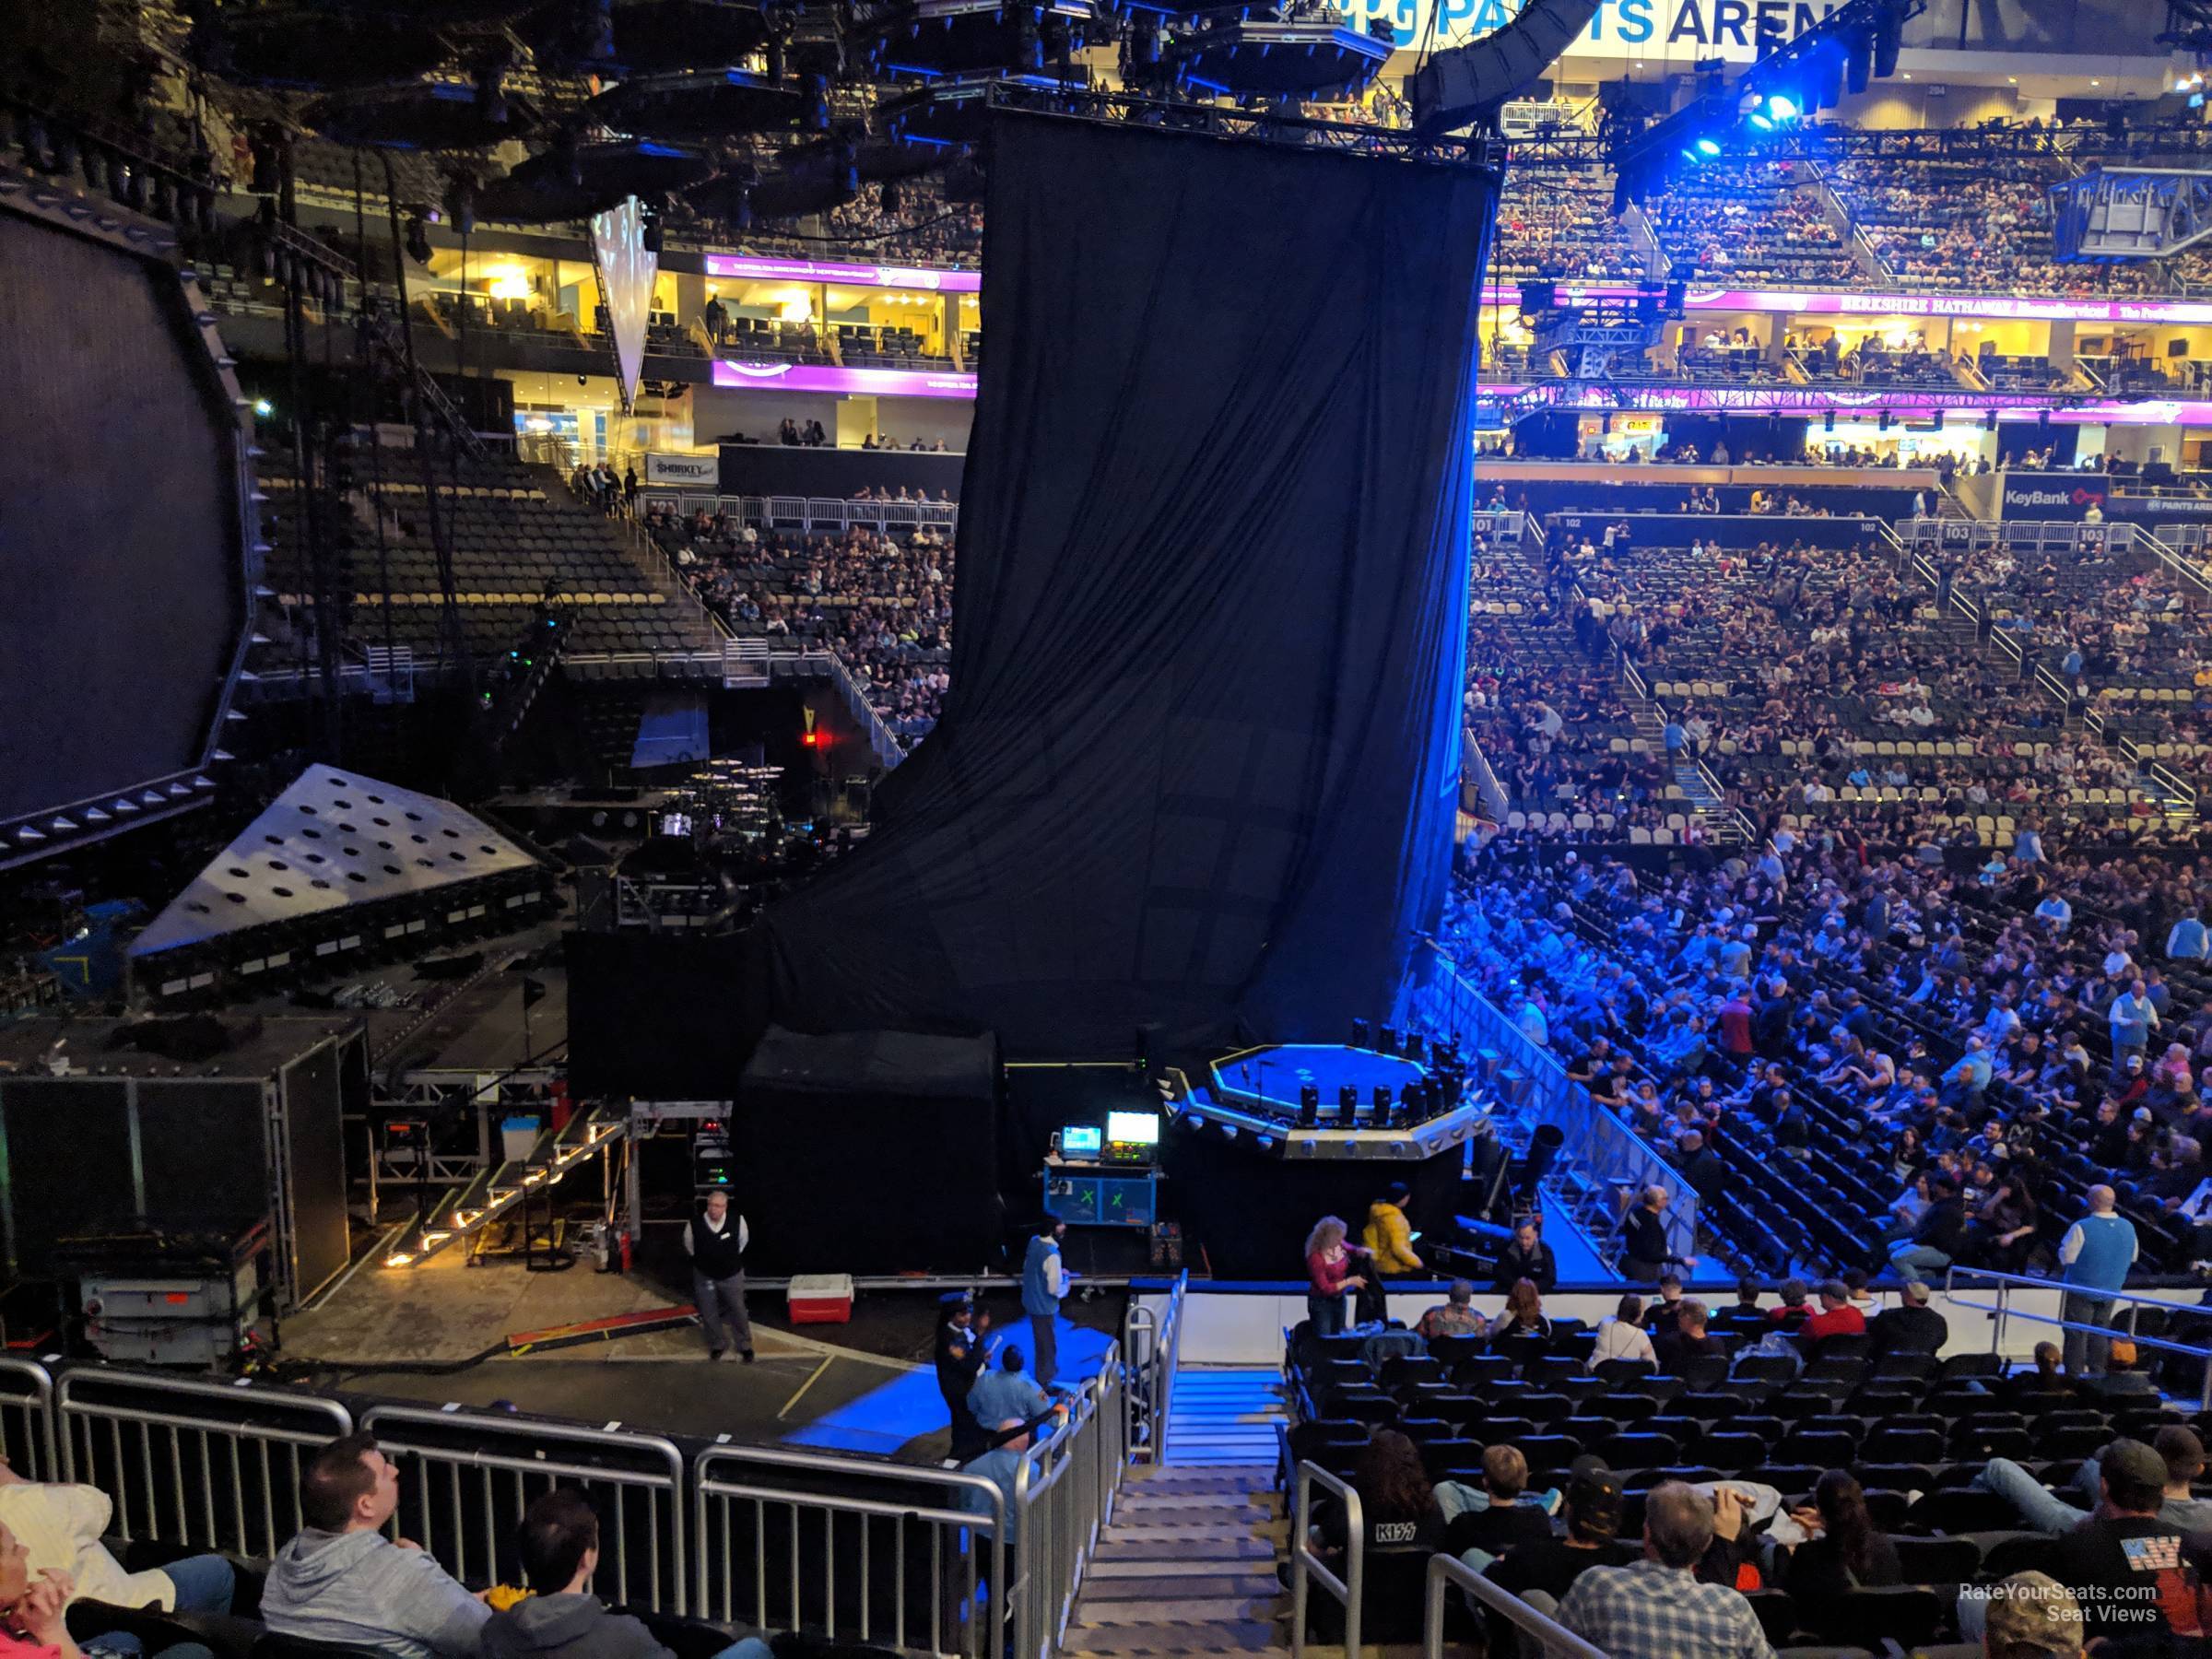 section 114, row w seat view  for concert - ppg paints arena